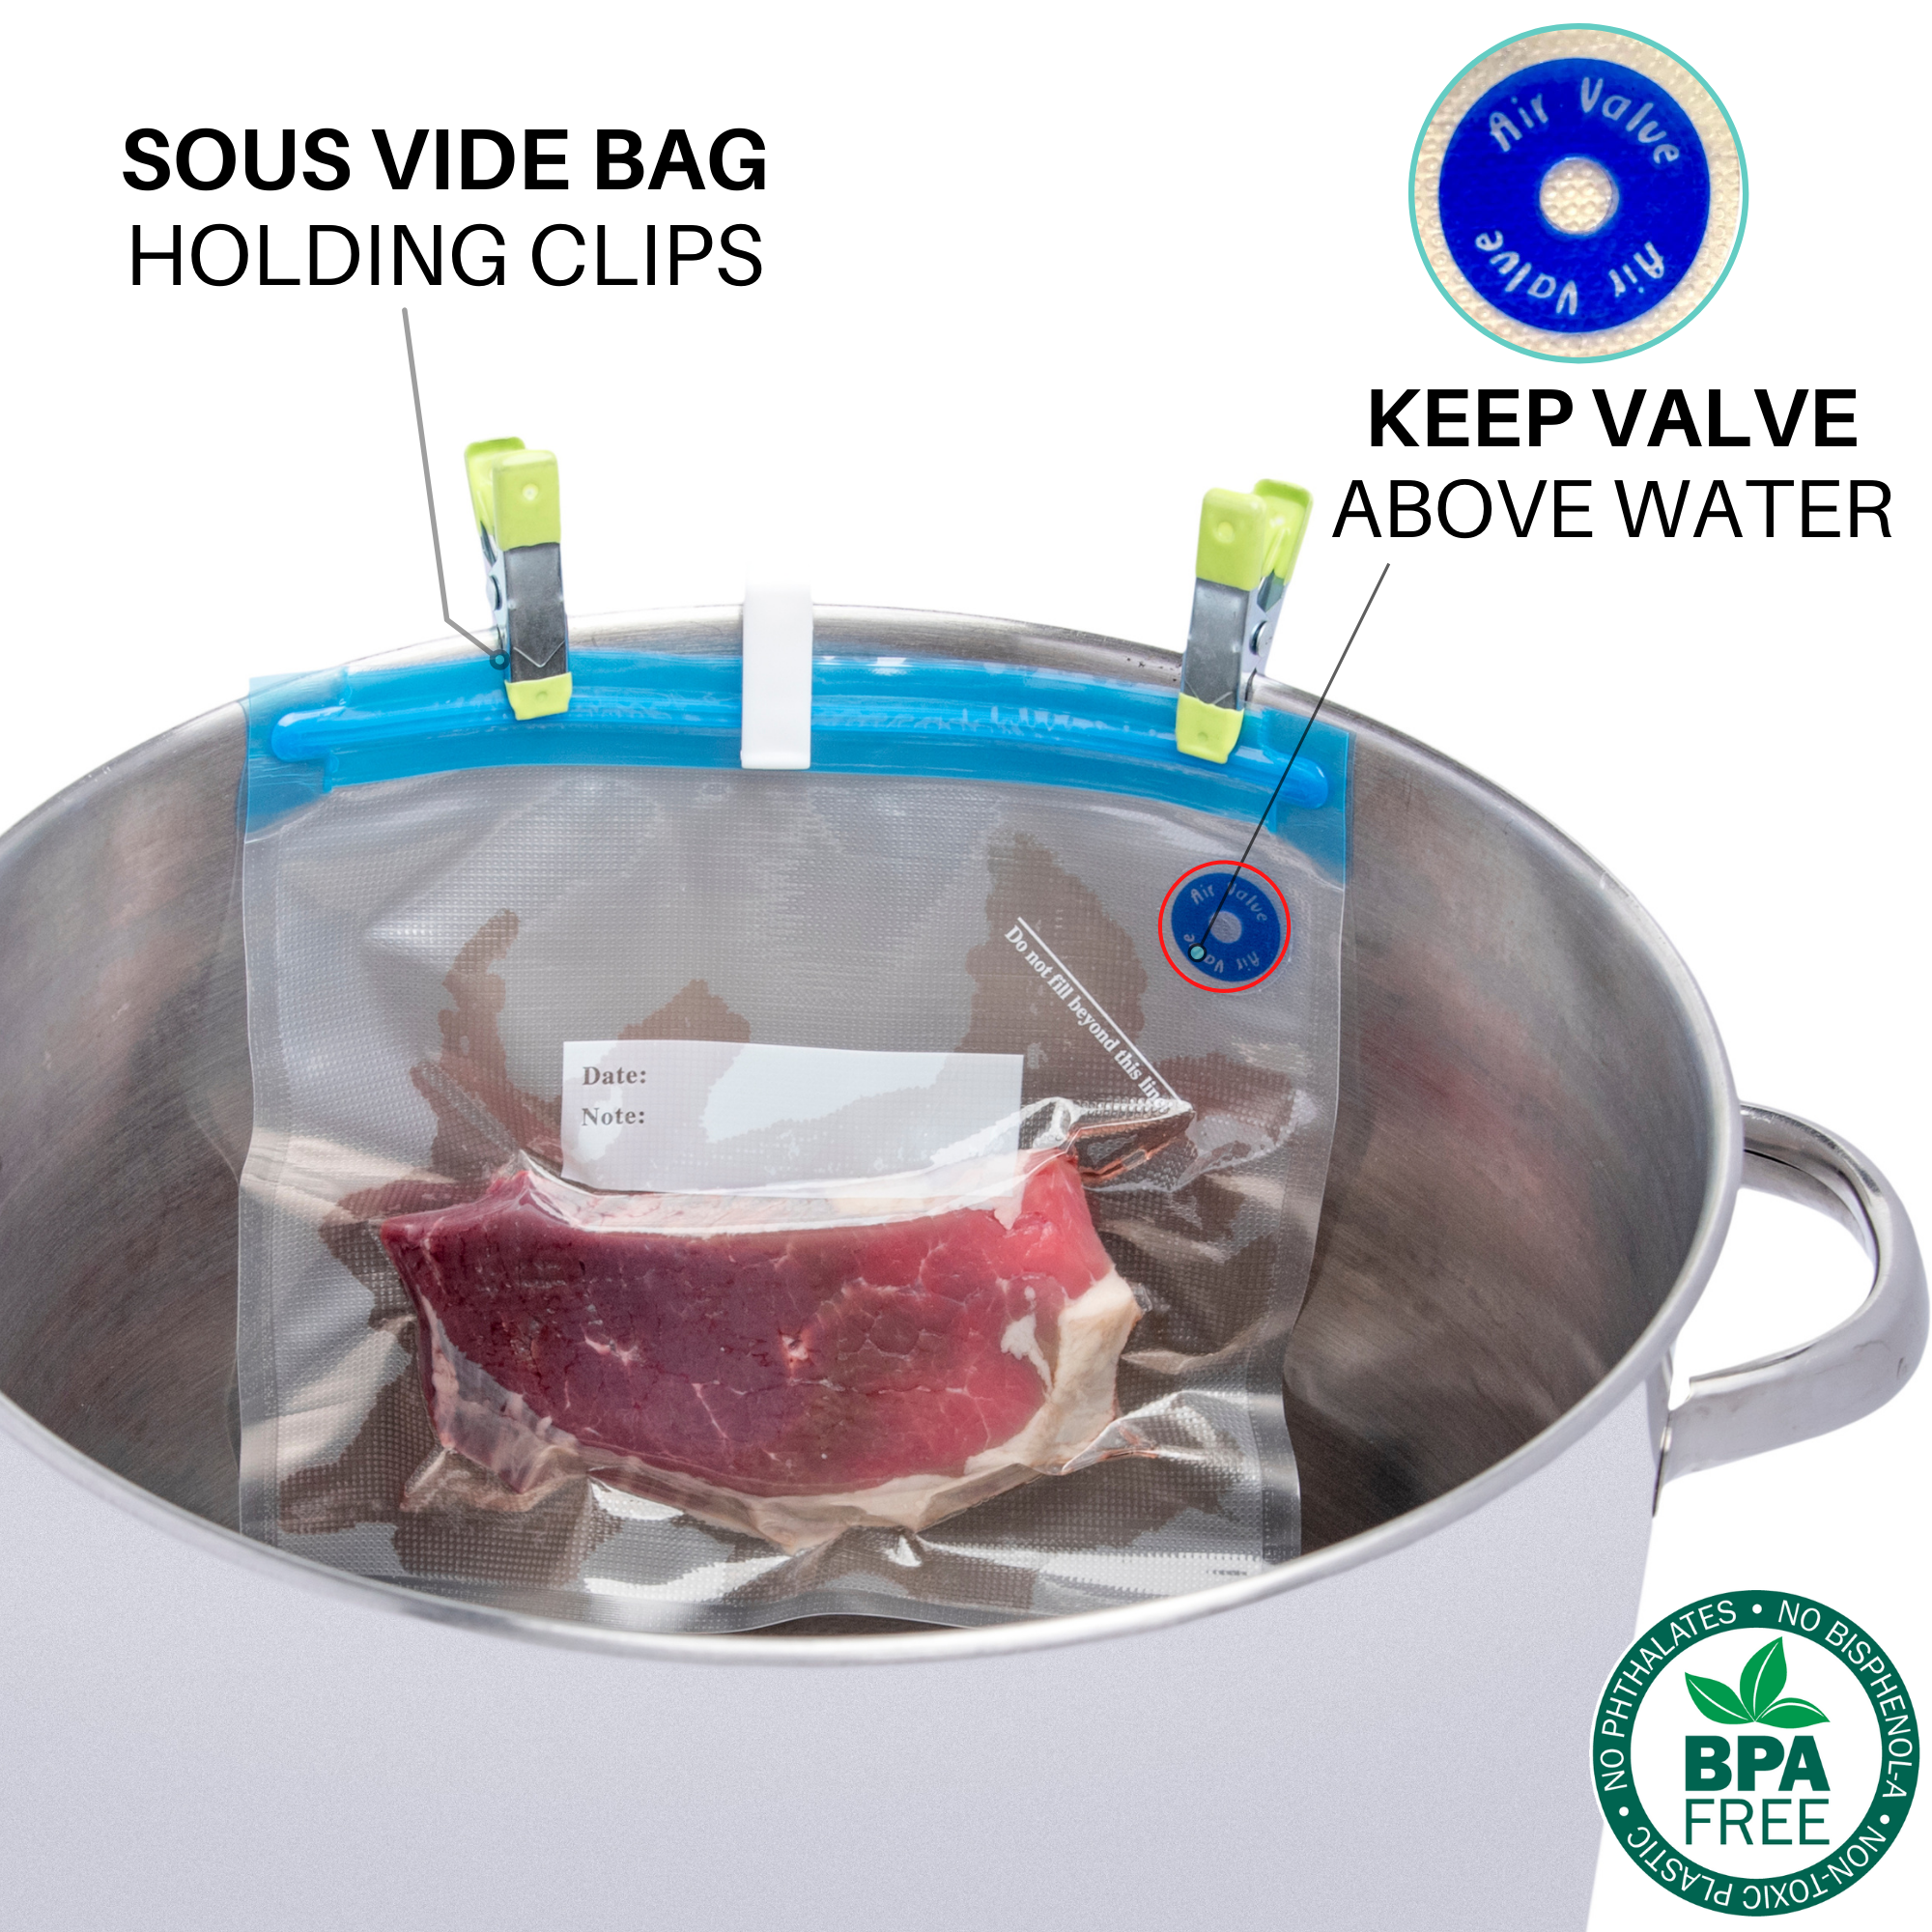 Uarter Sous Vide Bags Kit，15 BPA Free Vacuum Sealer Bags (3 Sizes), 1 Hand  Pump and 1 Sous Vide Bag Sealing Clip, Reusable, Easy to Use, Practical for  Food Storage